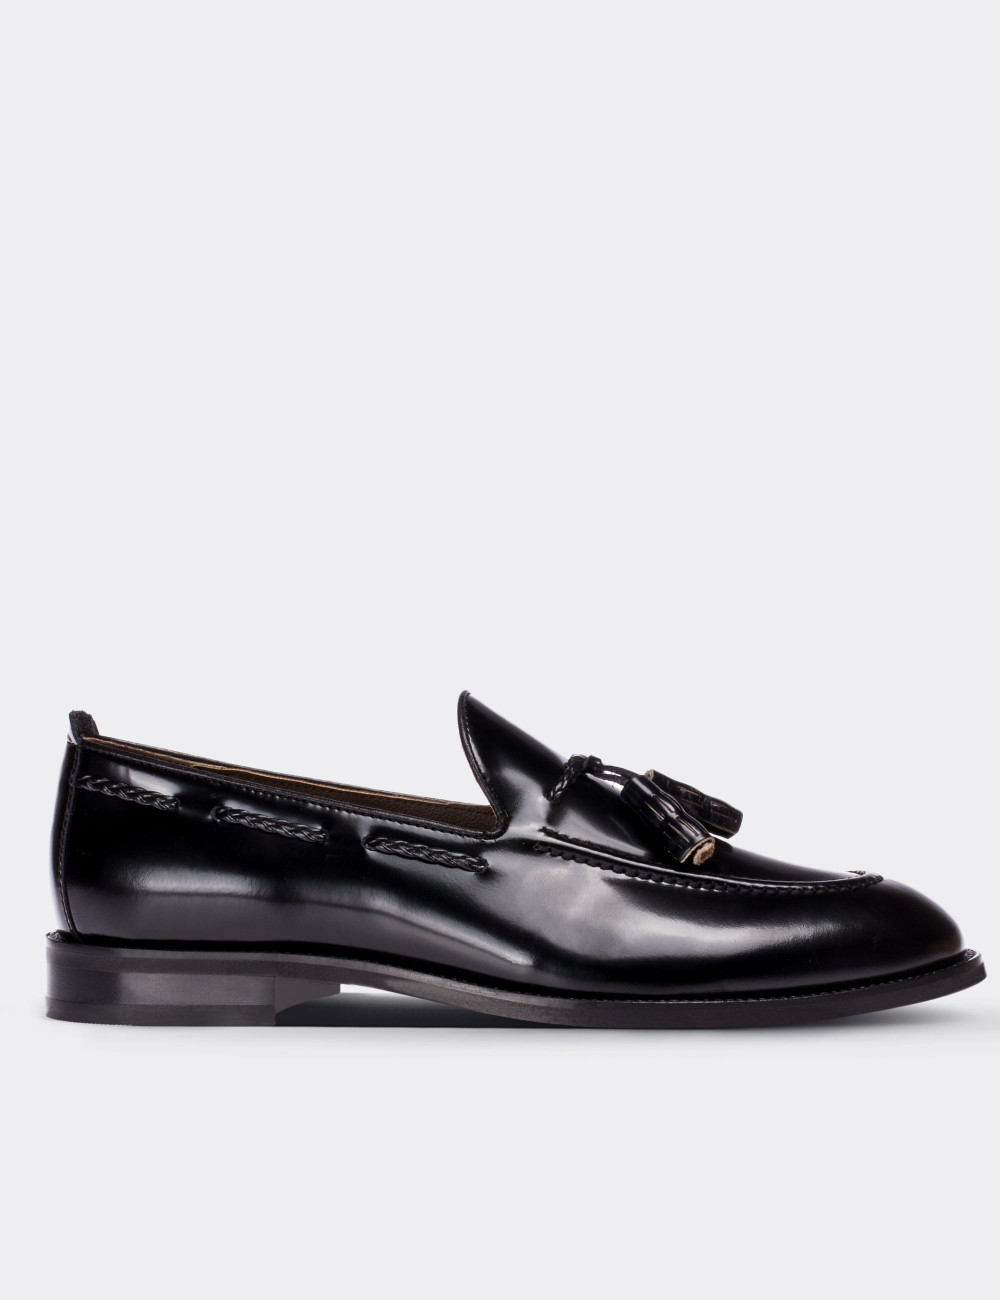 Black  Leather Loafers Shoes - 01642MSYHM04